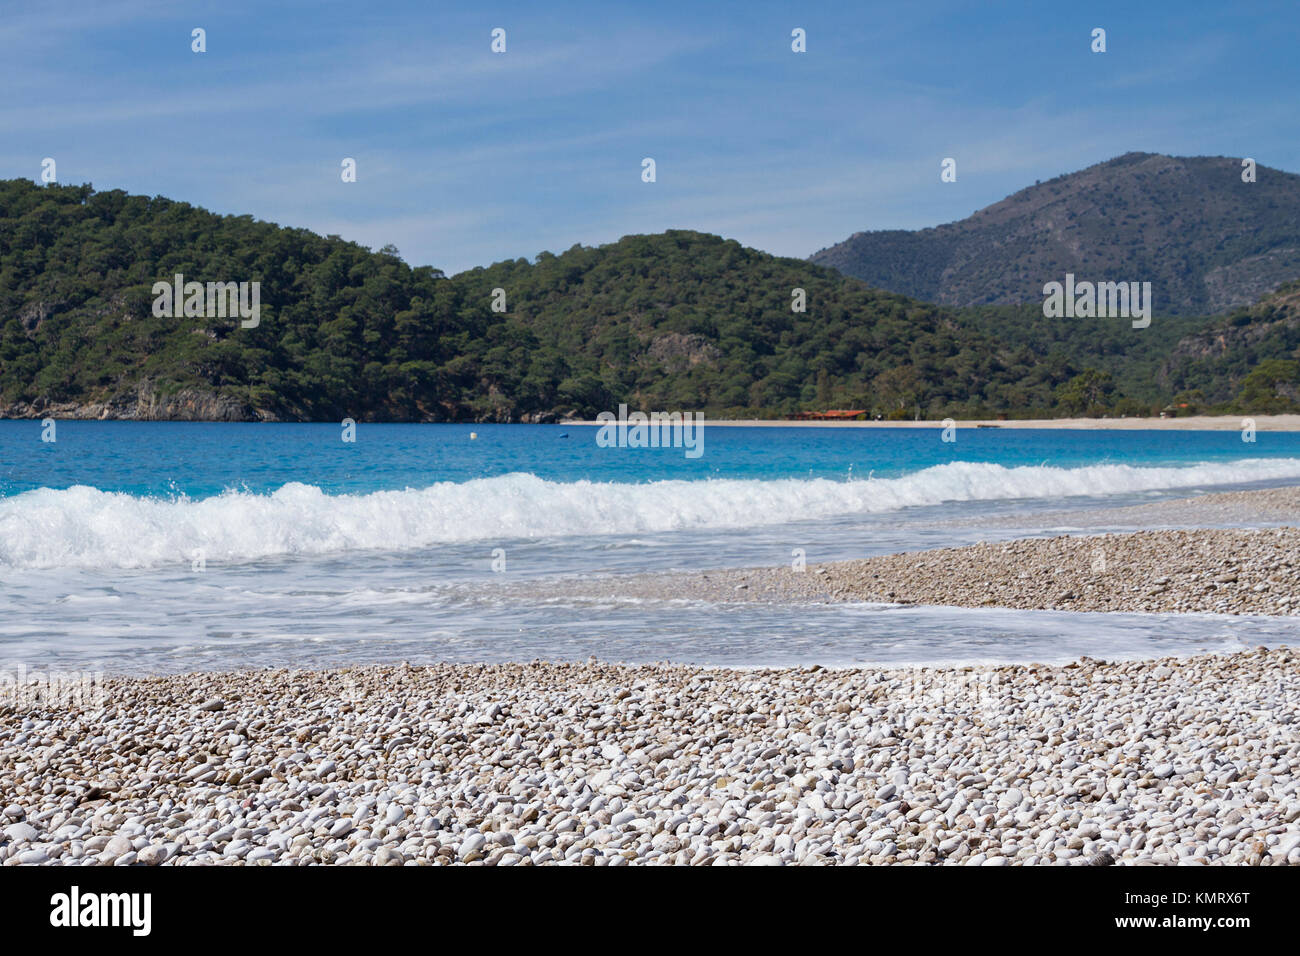 Turkish coastline with turquoise color water of the Aegean Sea. Stock Photo